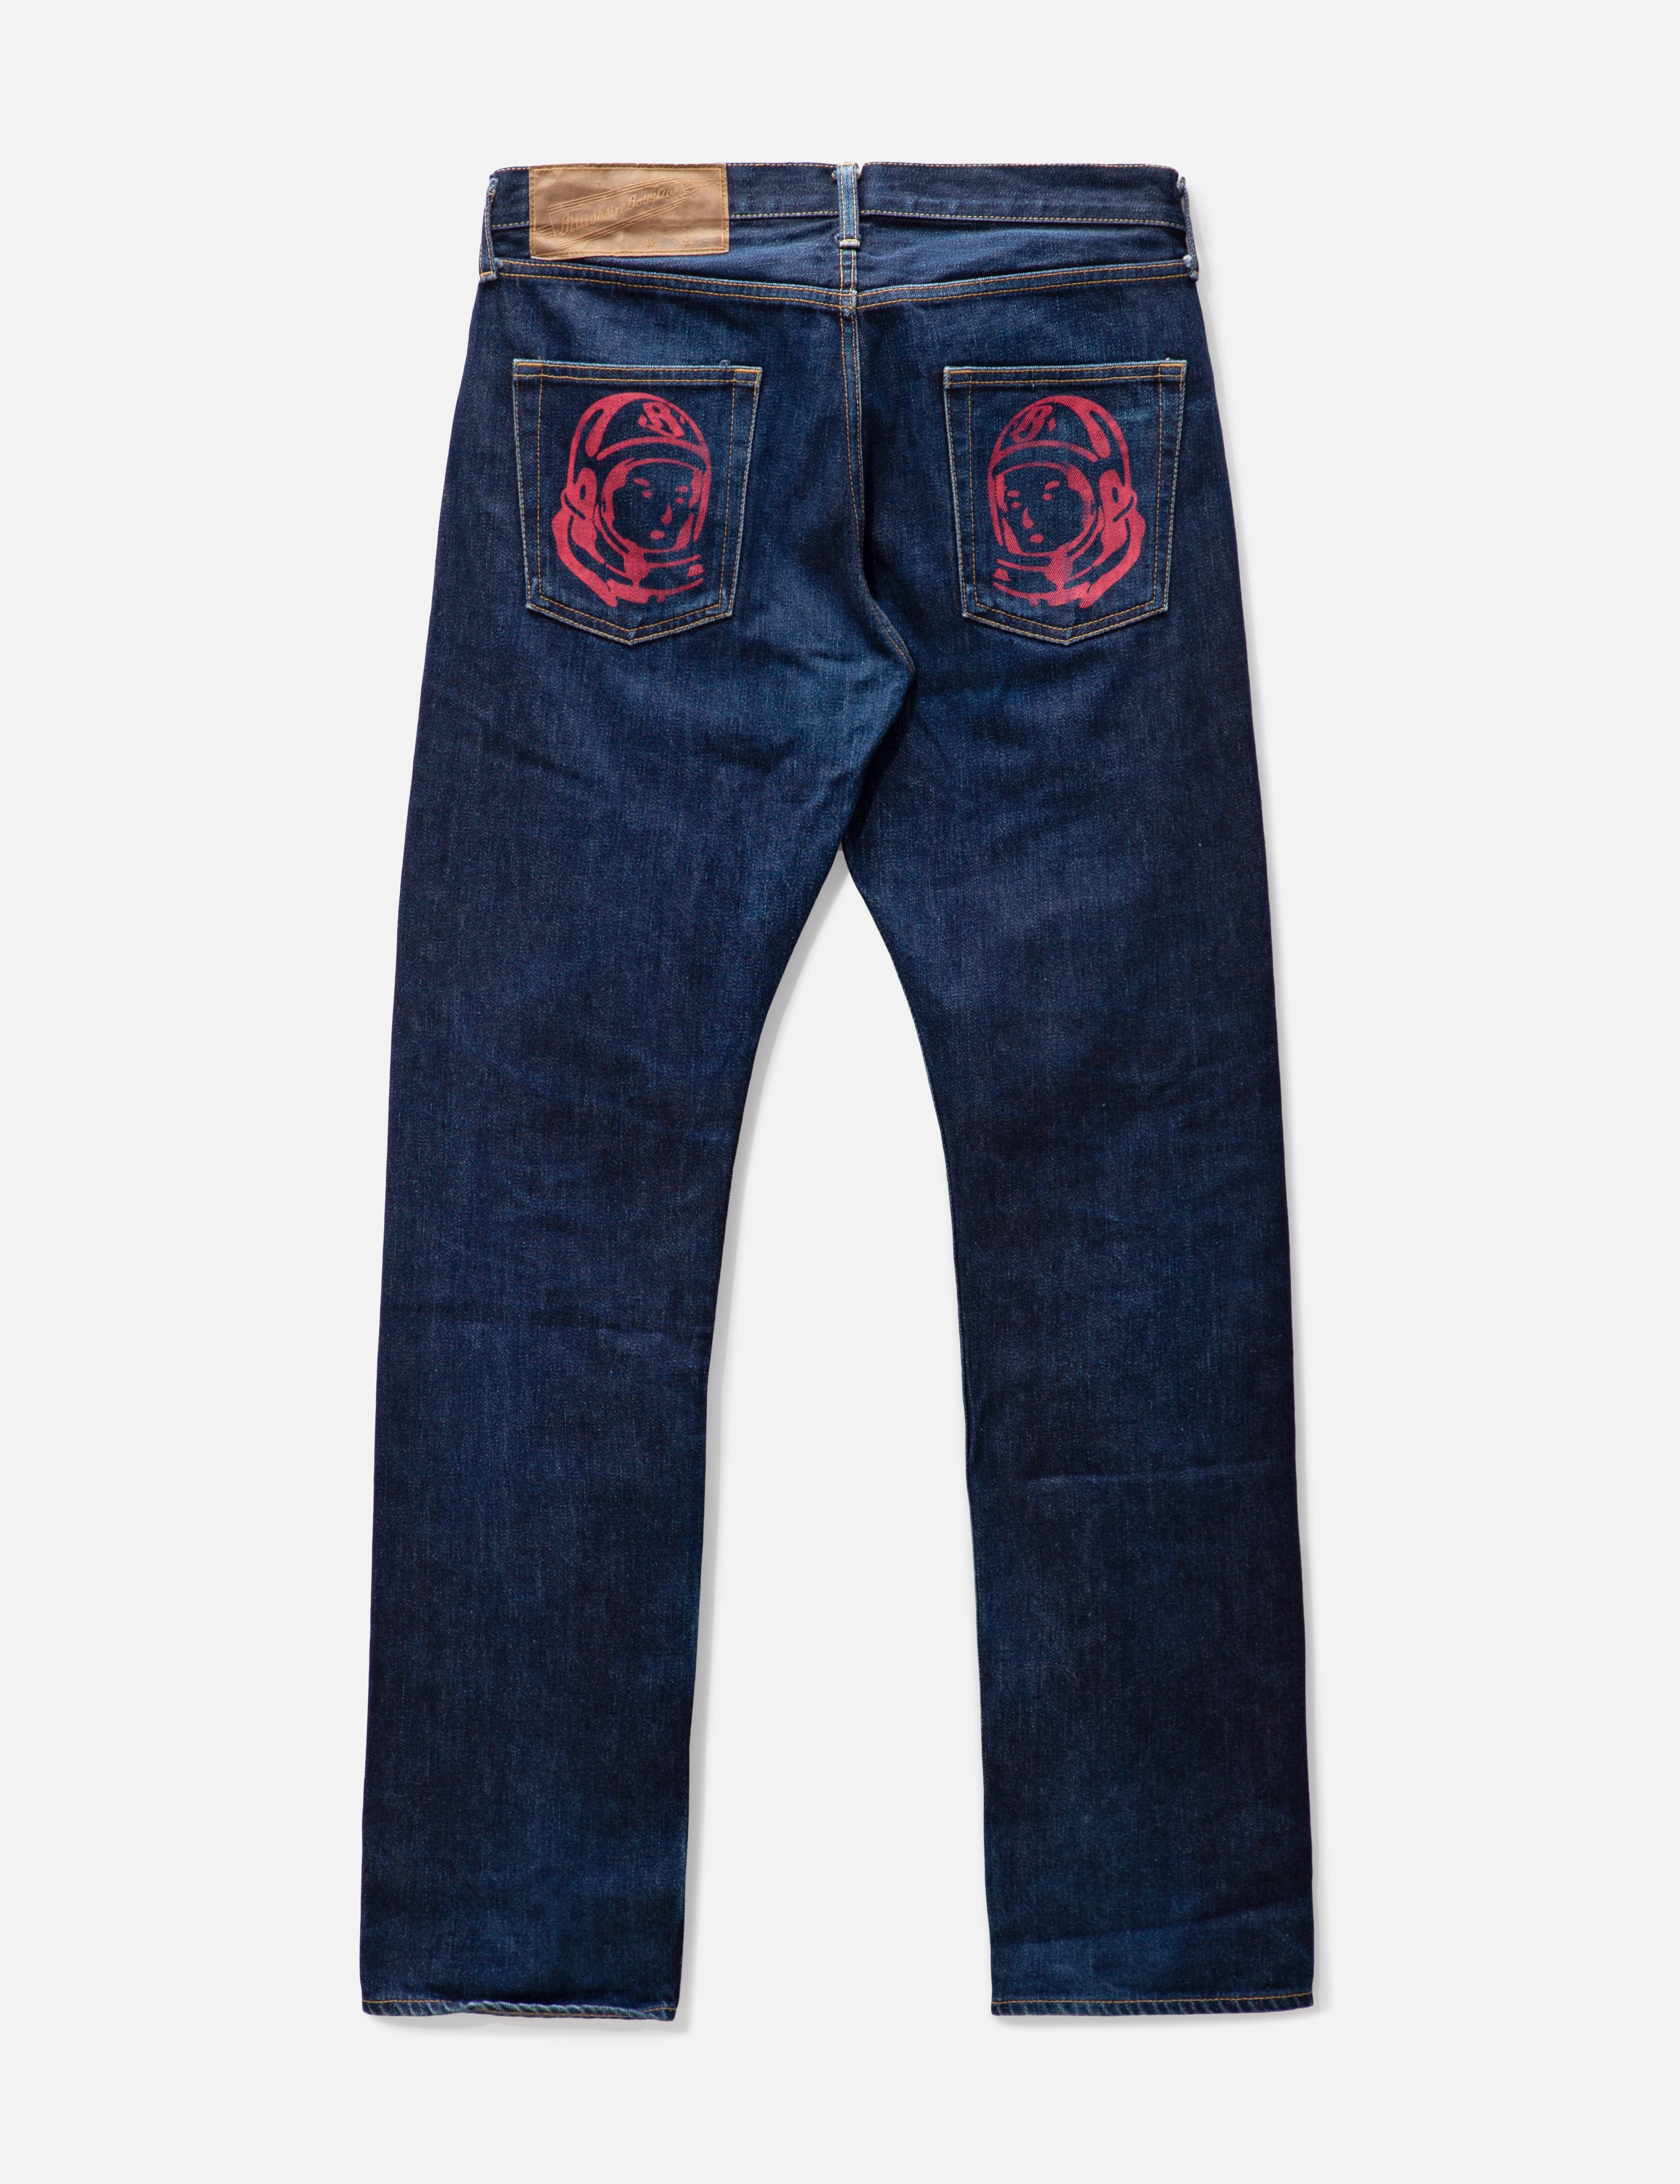 Billionaire Boys Club - BILLIONAIRE BOYS CLUB RUNNING DOG DENIM JEANS | HBX  - Globally Curated Fashion and Lifestyle by Hypebeast